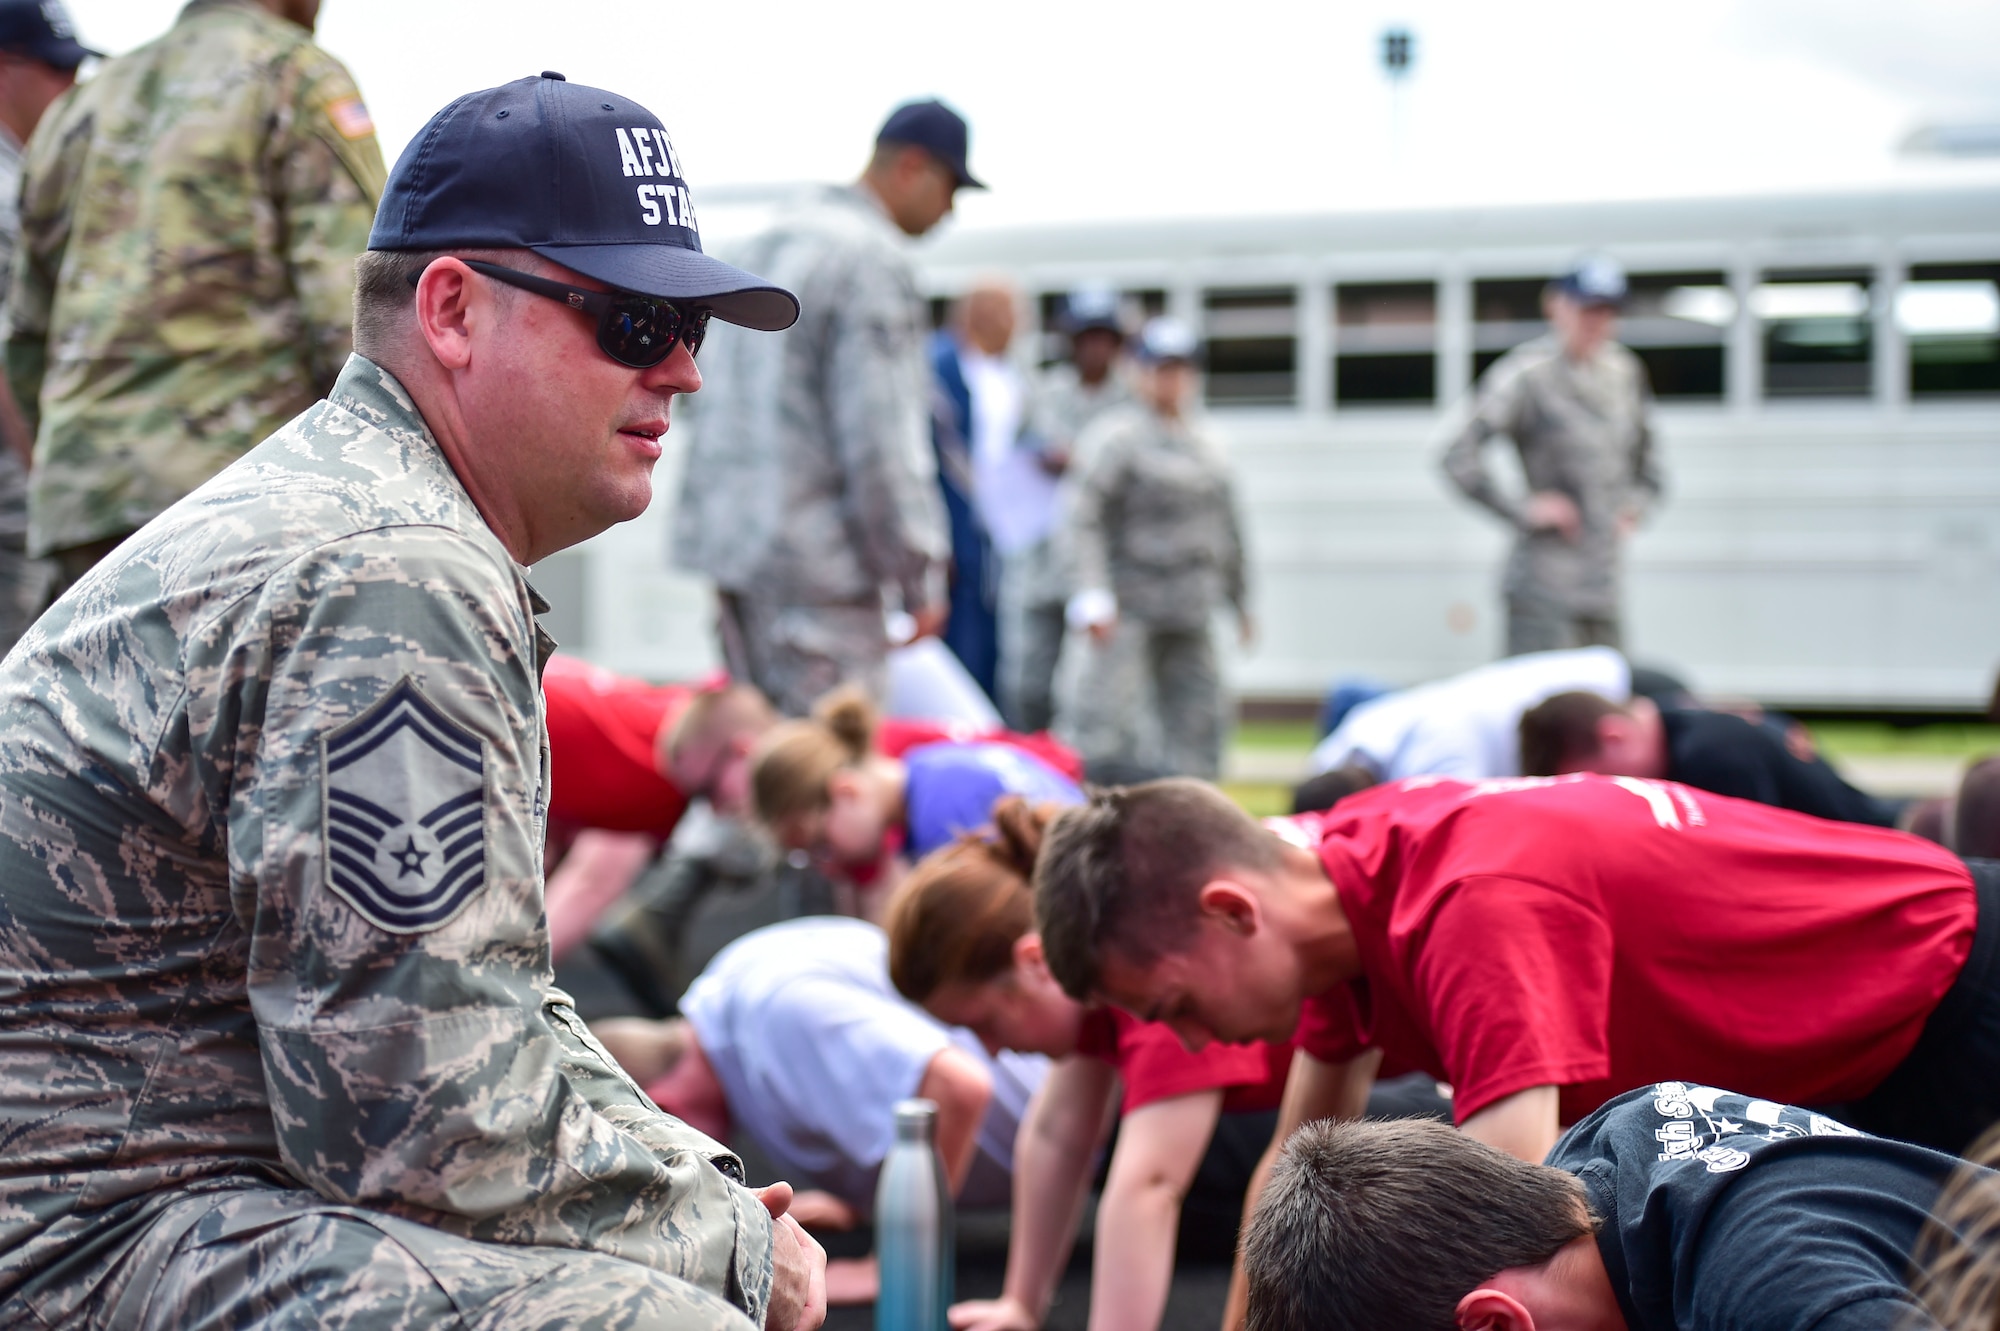 U.S. Air Force Citizen Airman Senior Master Sgt. James Jesionowski, a member of the 910th Medical Squadron, supervises physical training for Junior Reserve Officer Training Corps (JROTC) cadets during an encampment here, June 21, 2017. The encampment, facilitated by 910th Airlift Wing Airmen, provided a five-day experience teaching military skills and replicating aspects of Basic Military Training. JROTC is a program sponsored by the Armed Forces for high school students across the country. (U.S. Air Force photo/Eric White)